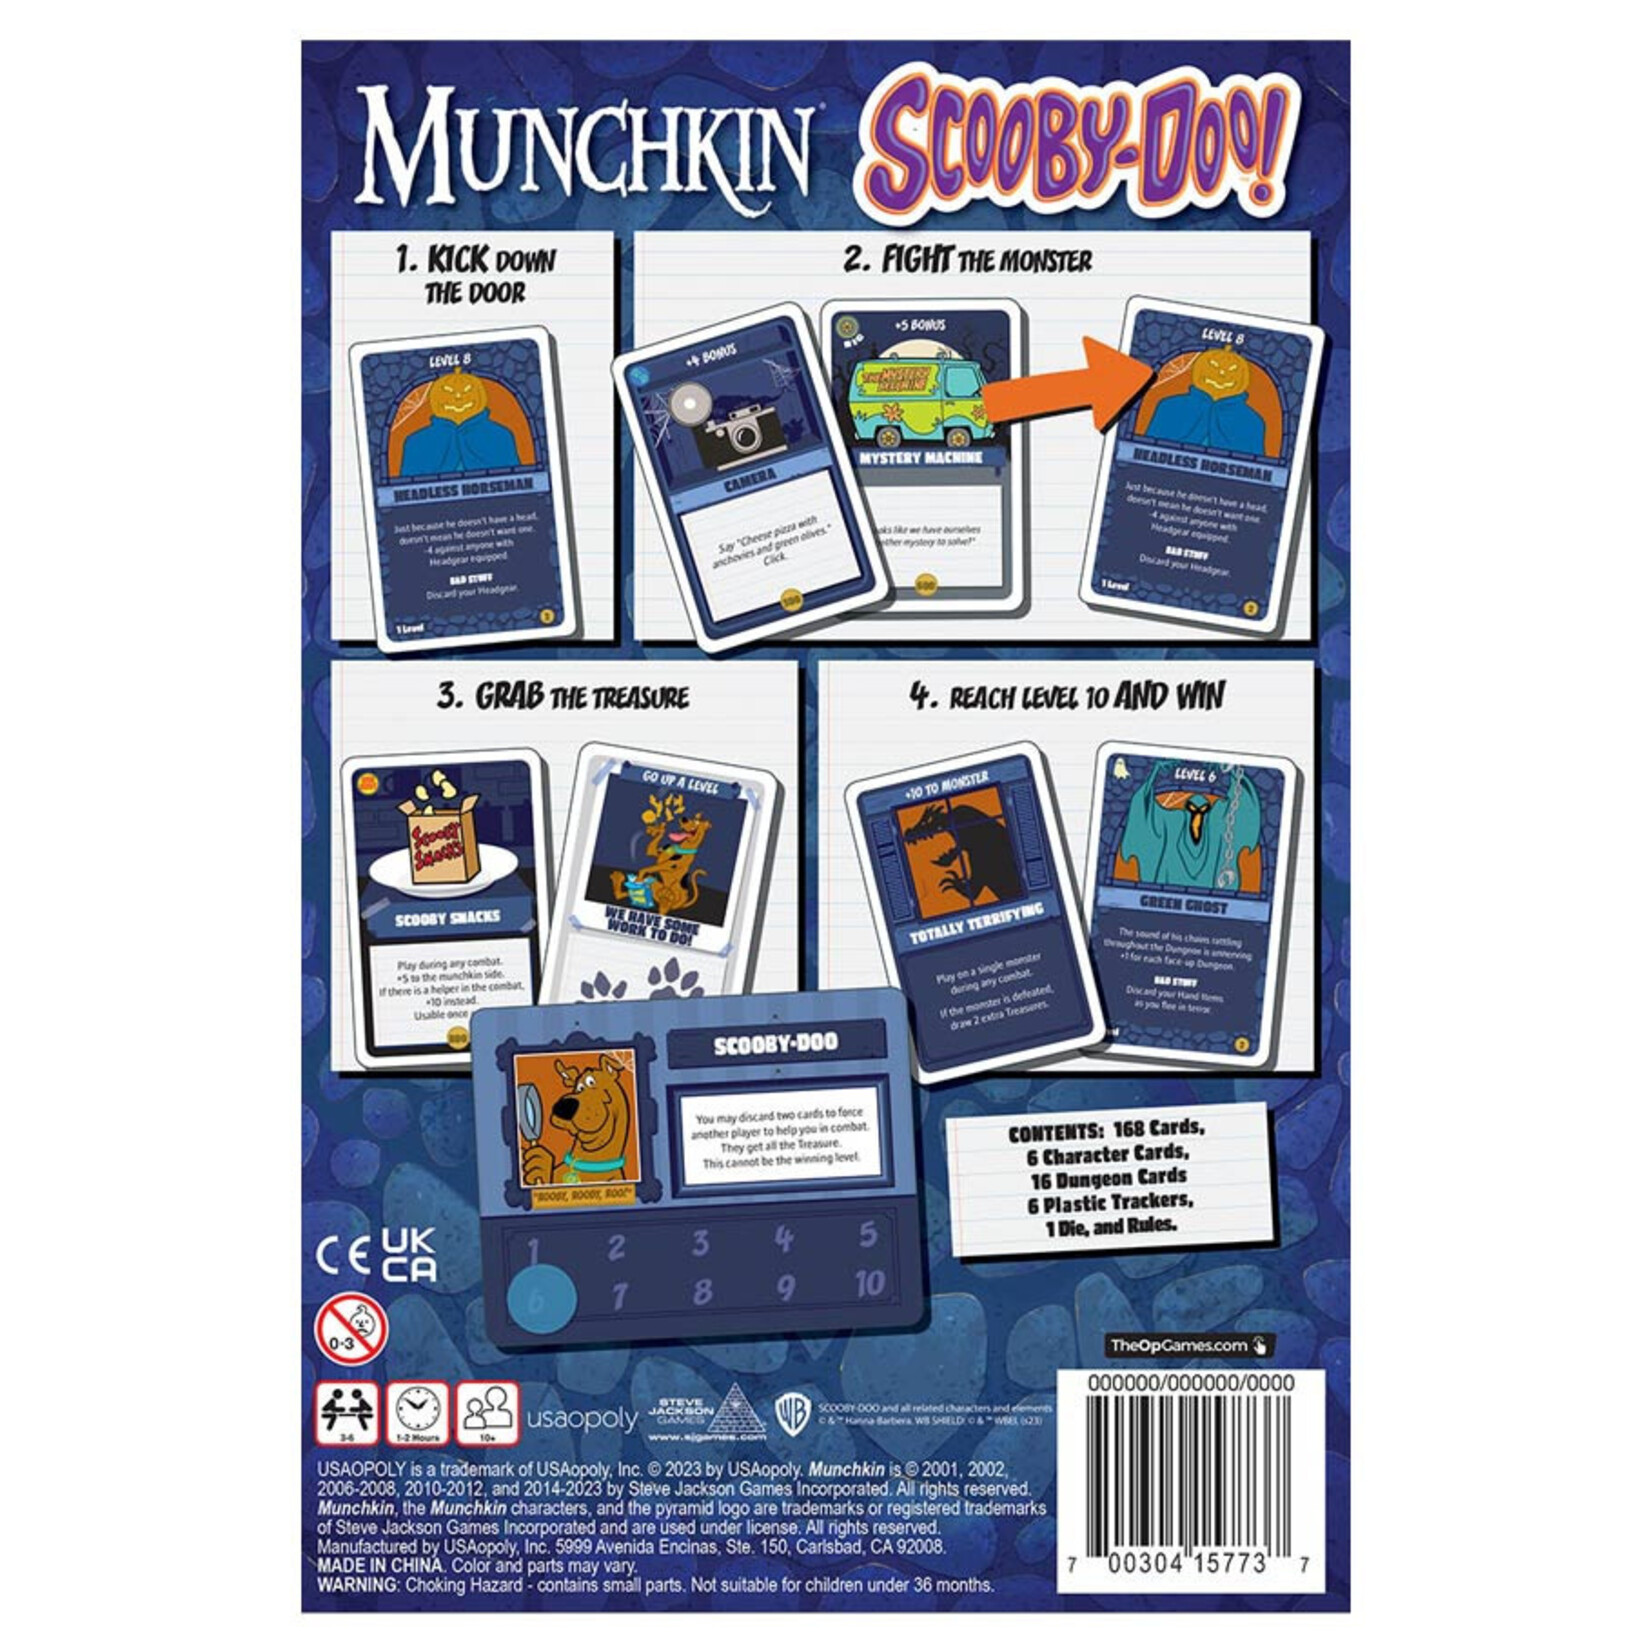 The OP-USAopoly Munchkin: Scooby-Doo